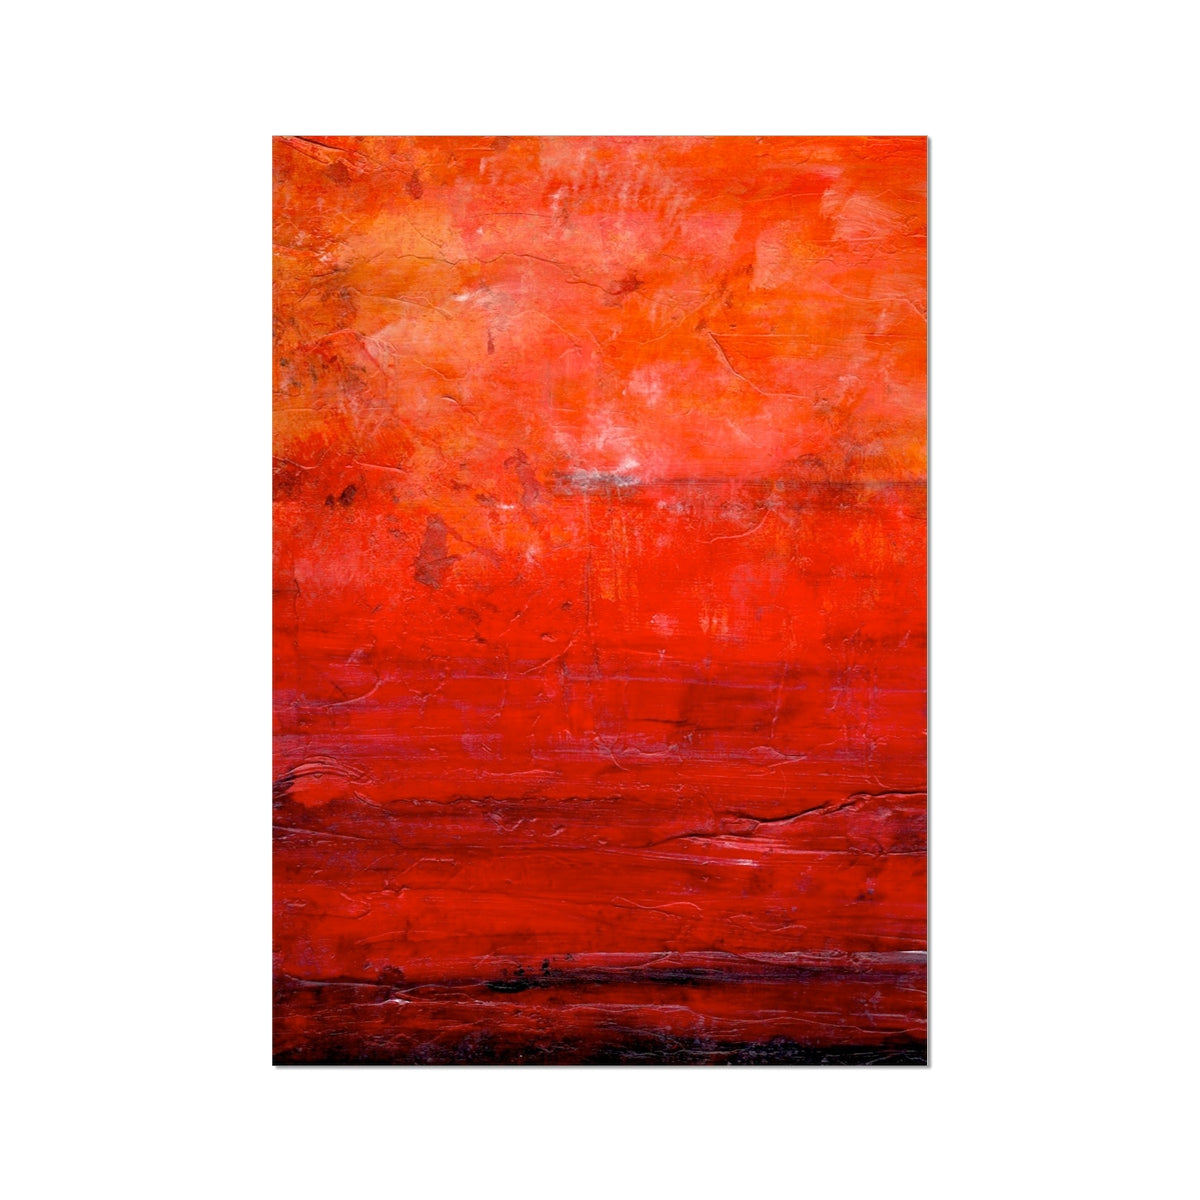 Abstract Summer Painting | Fine Art Prints From Scotland-Unframed Prints-Abstract & Impressionistic Art Gallery-A2 Portrait-Paintings, Prints, Homeware, Art Gifts From Scotland By Scottish Artist Kevin Hunter